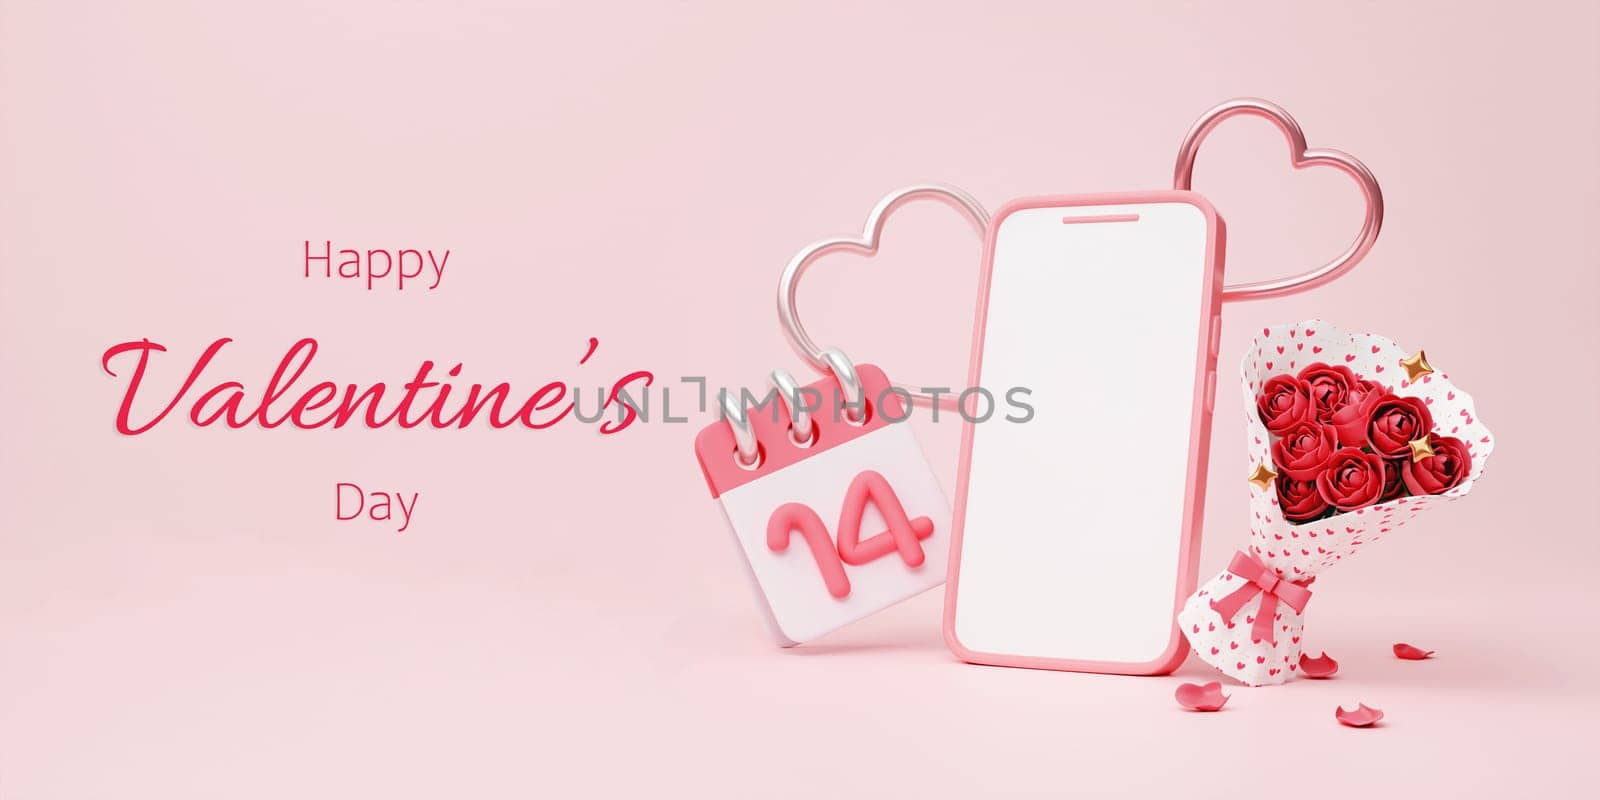 3D rendering mobile phone mockup with hearts for Valentines day background design. Empty generic smartphone blank screen template. 3D render illustration by meepiangraphic